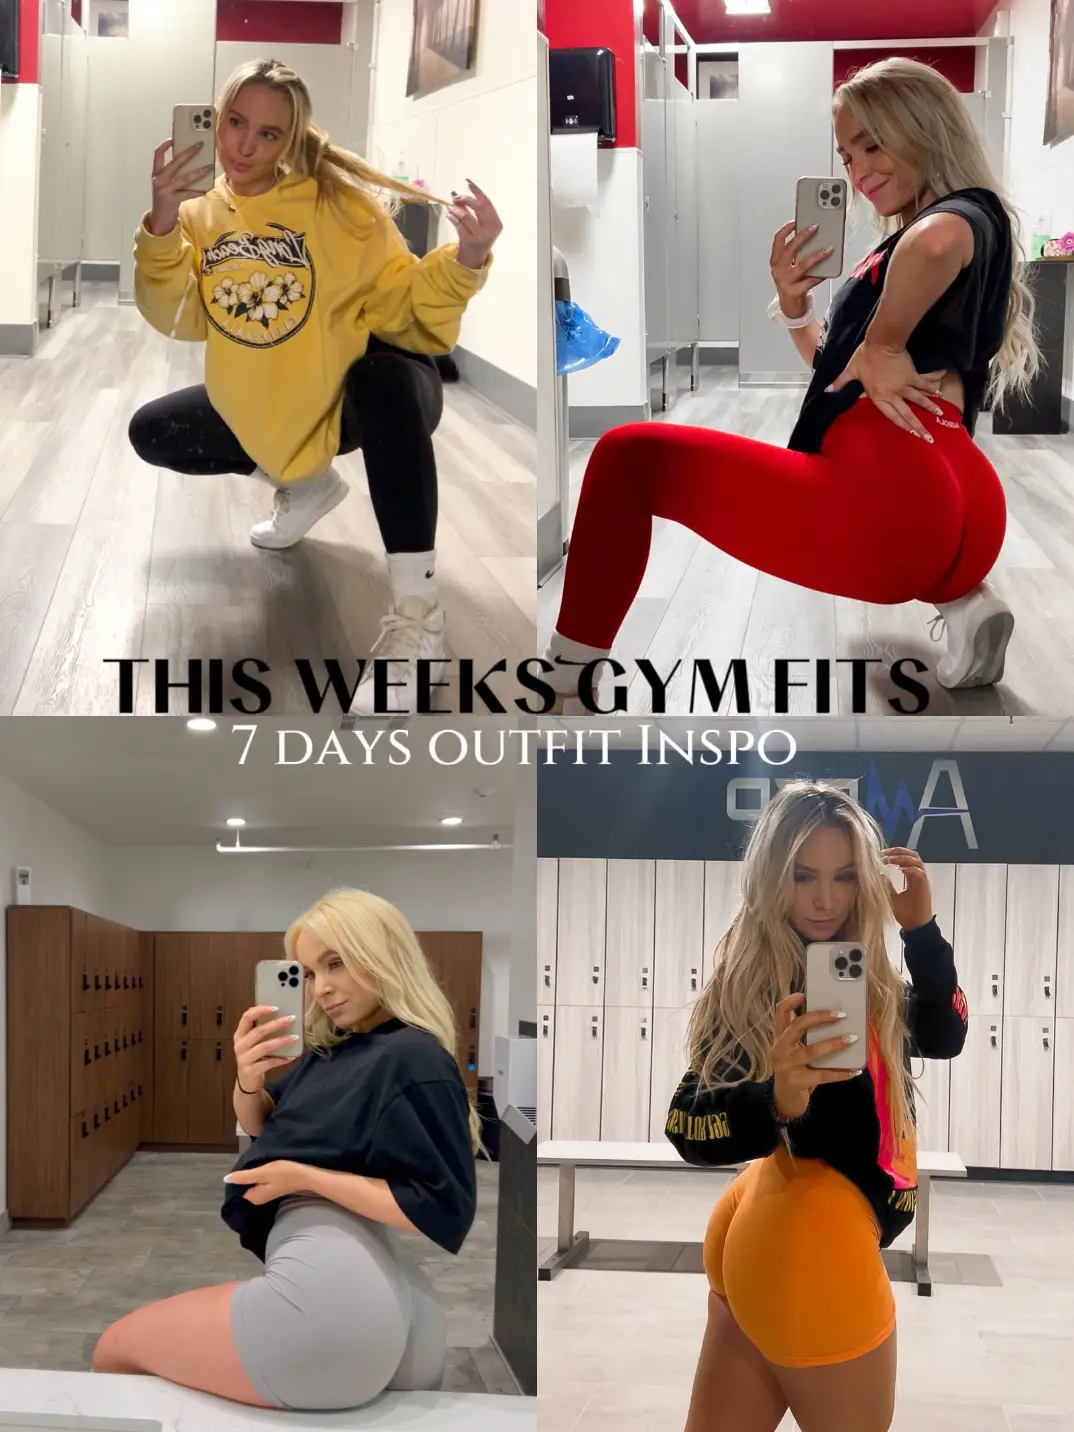 Gym fits of the week / Being an influencer